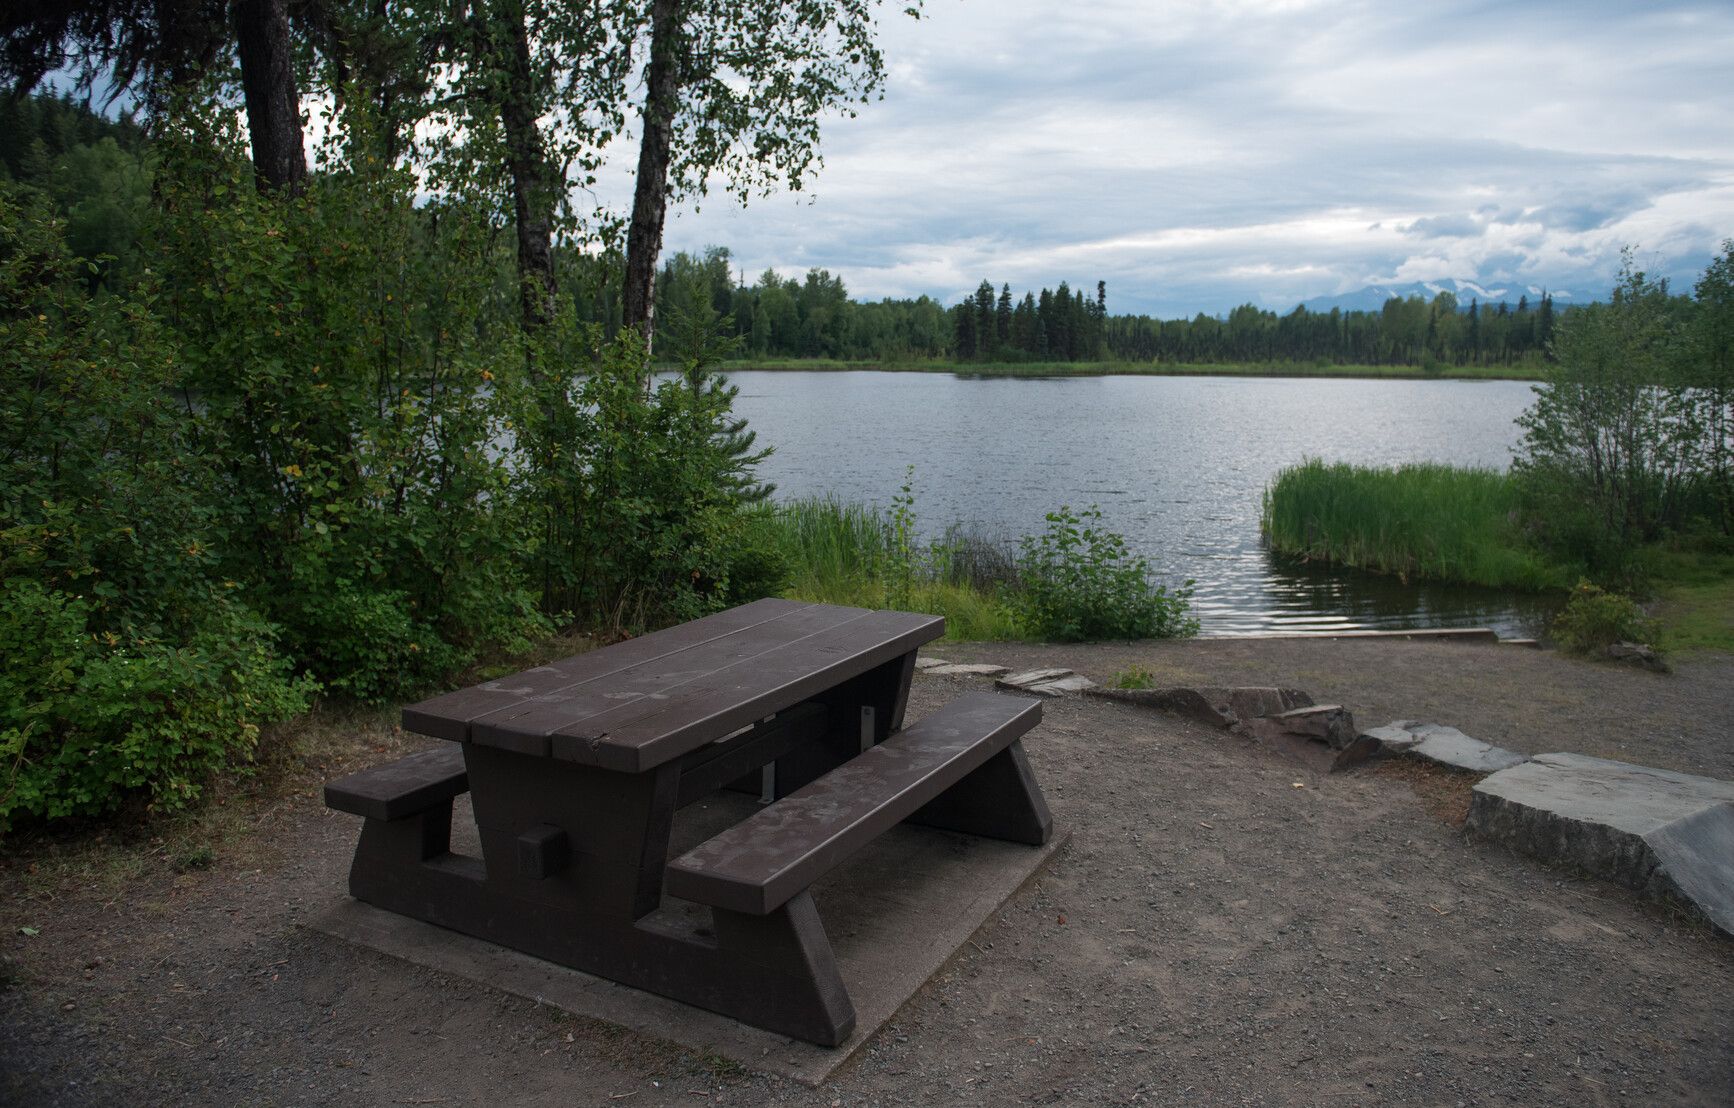 A picnic table in the day-use area of Seeley Lake Park.